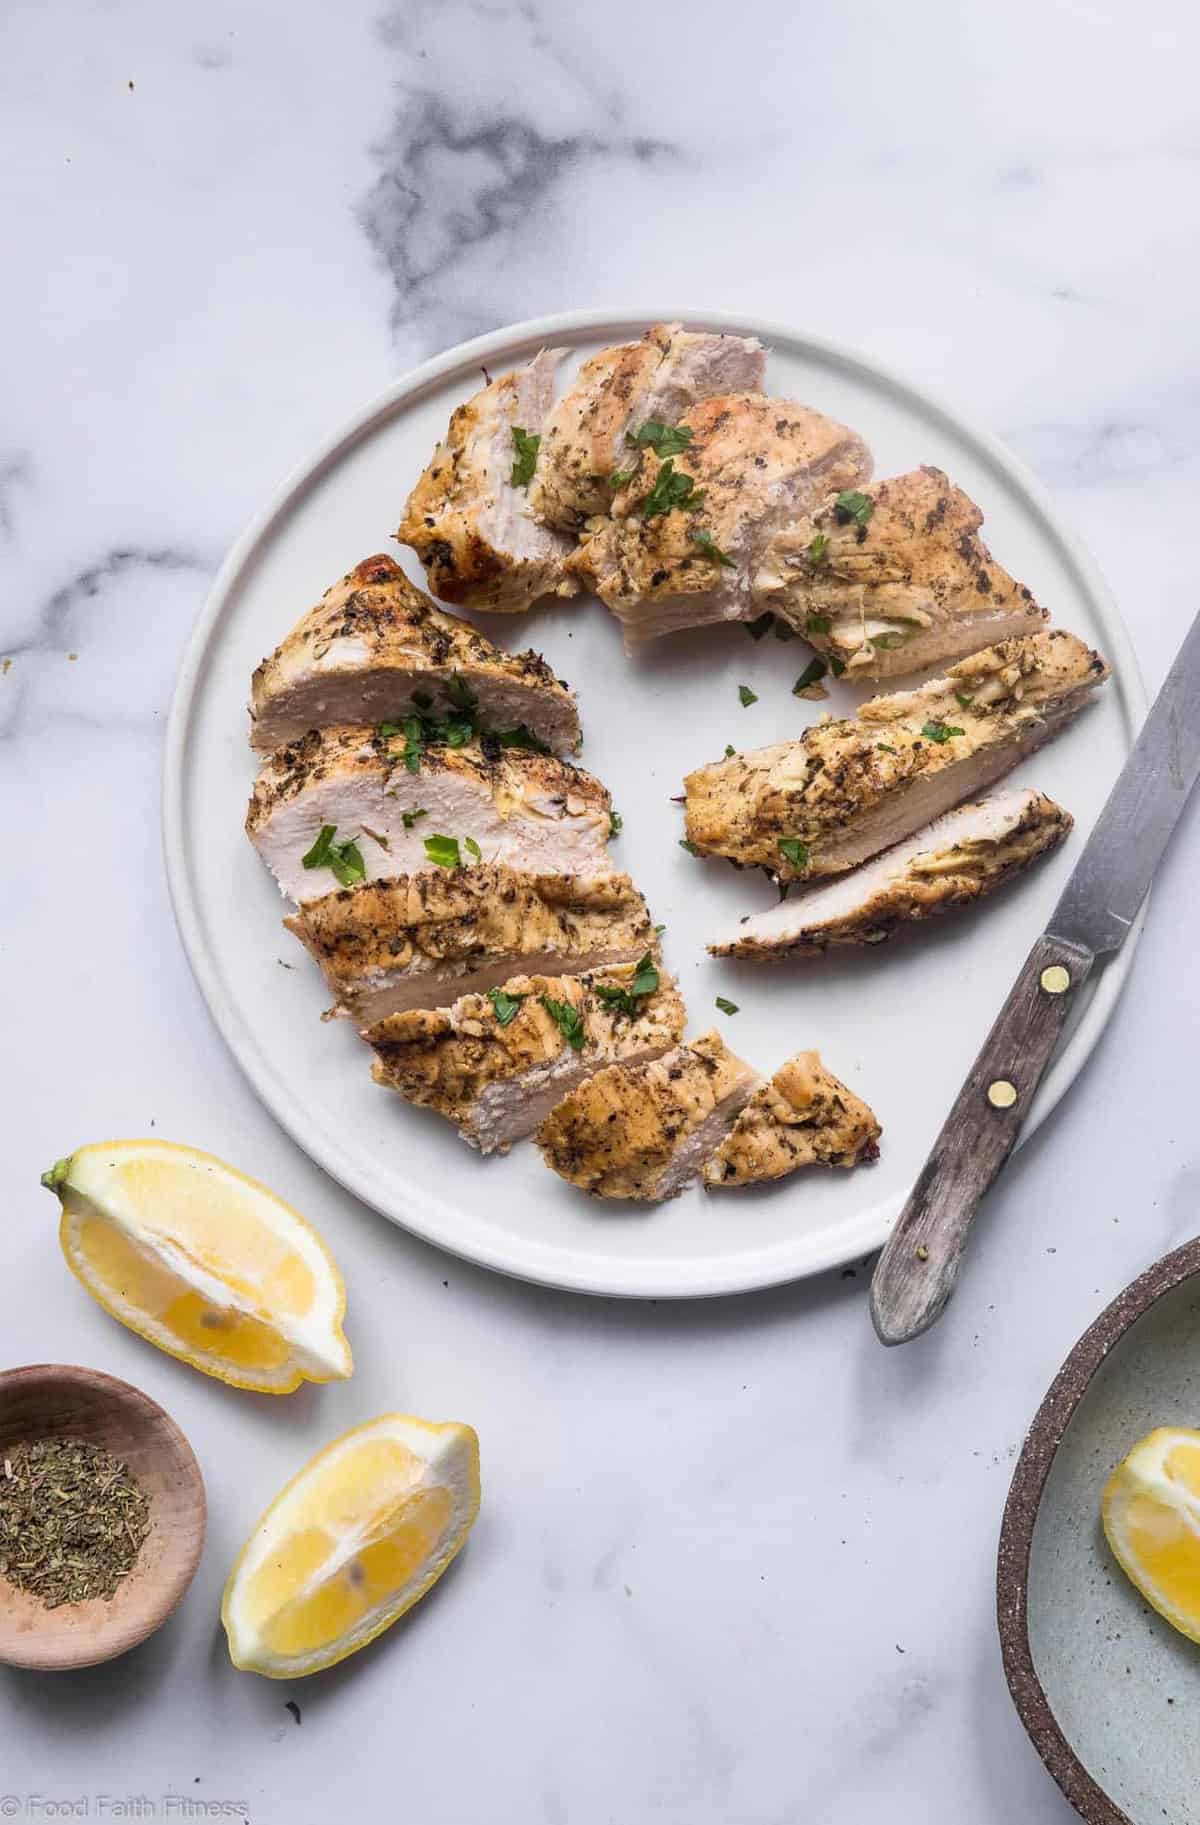 Easy Keto Chicken Marinade - This low carb, sugar free Chicken Marinade is the easiest and most versatile marinade for grilled chicken ever! Simple, made from pantry ingredients and gluten free/paleo/whole30! | #Foodfaithfitness | #glutenfree #paleo #lowcarb #keto #whole30